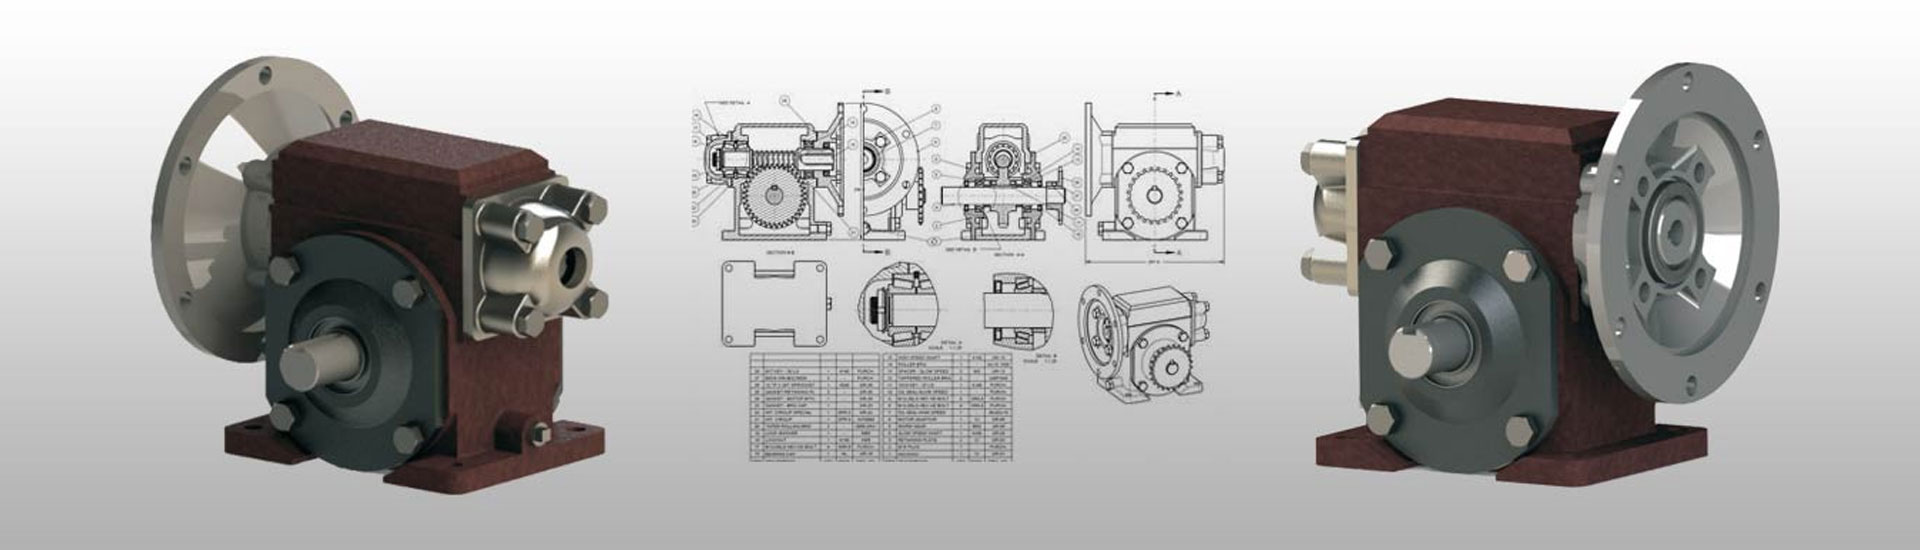 Transformed 2D Drawing To 3D CAD Models For Industrial Tool Manufacturer